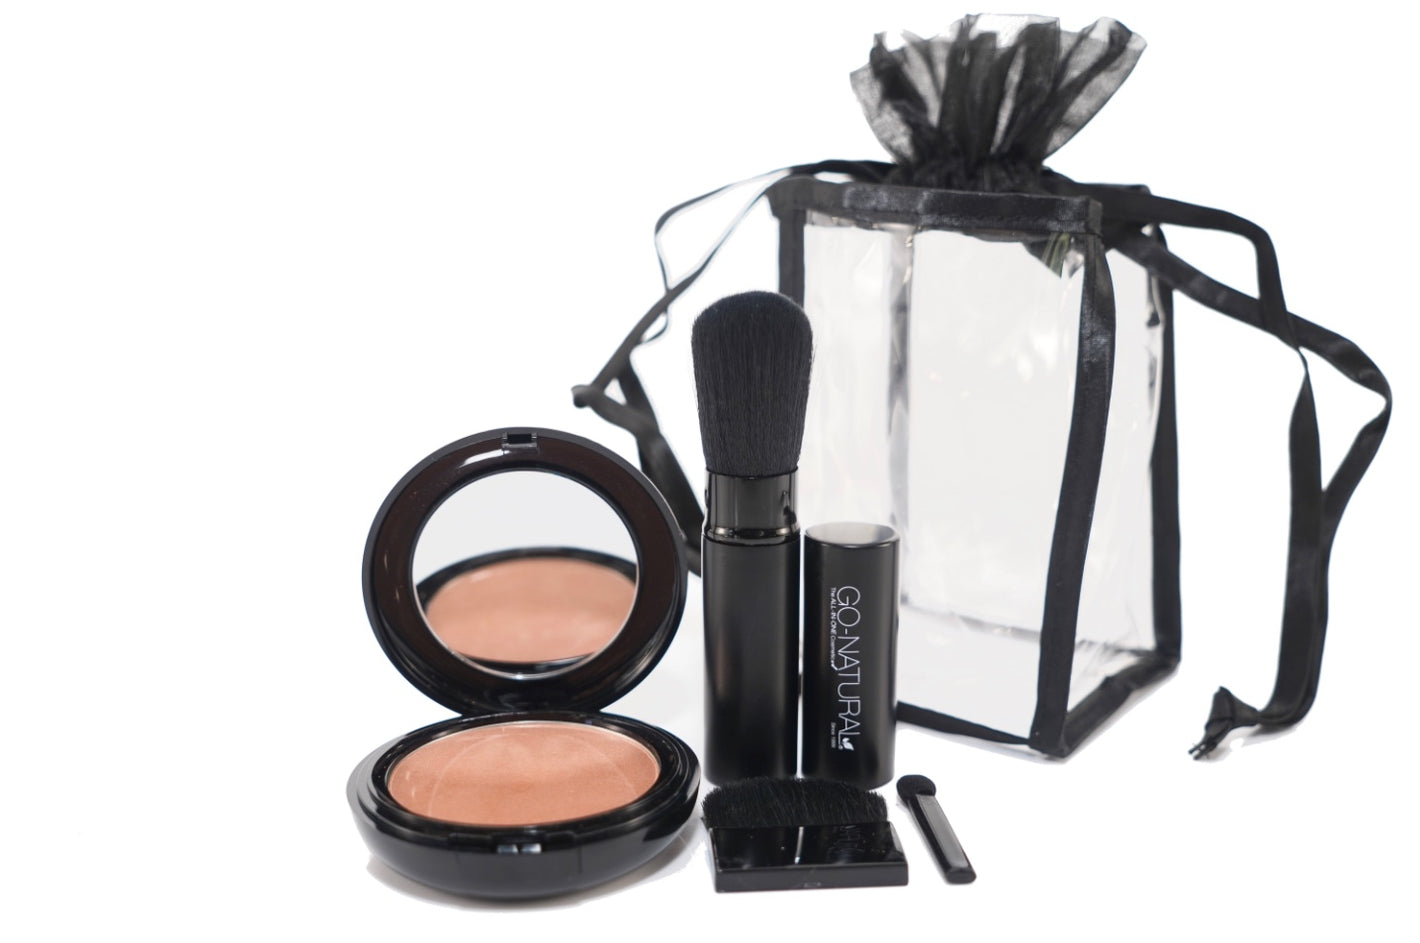 go natural all in one cosmetic makeup beauty powder compact travel gift set works simply